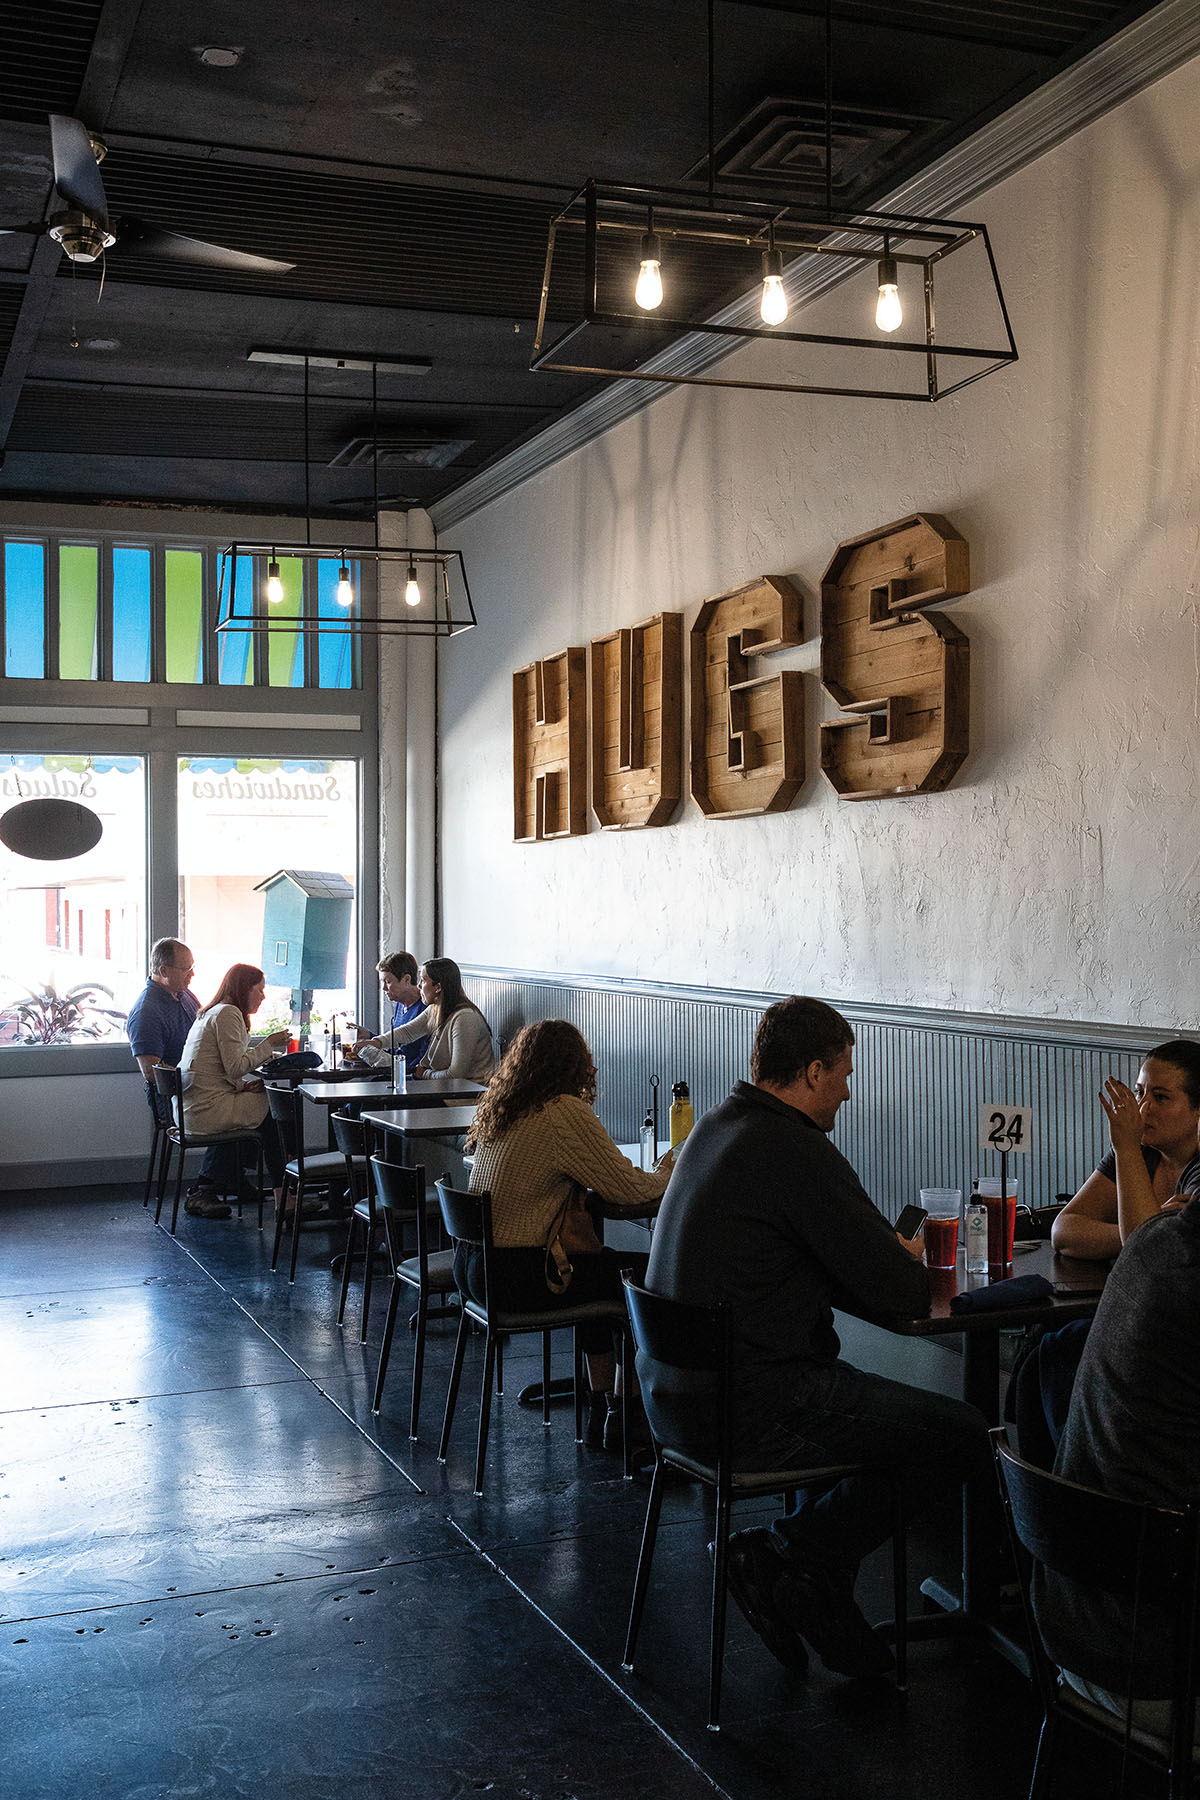 The white and beadboard wall of the restaurant with a wooden sign reading "HUGS" above several tables of diners